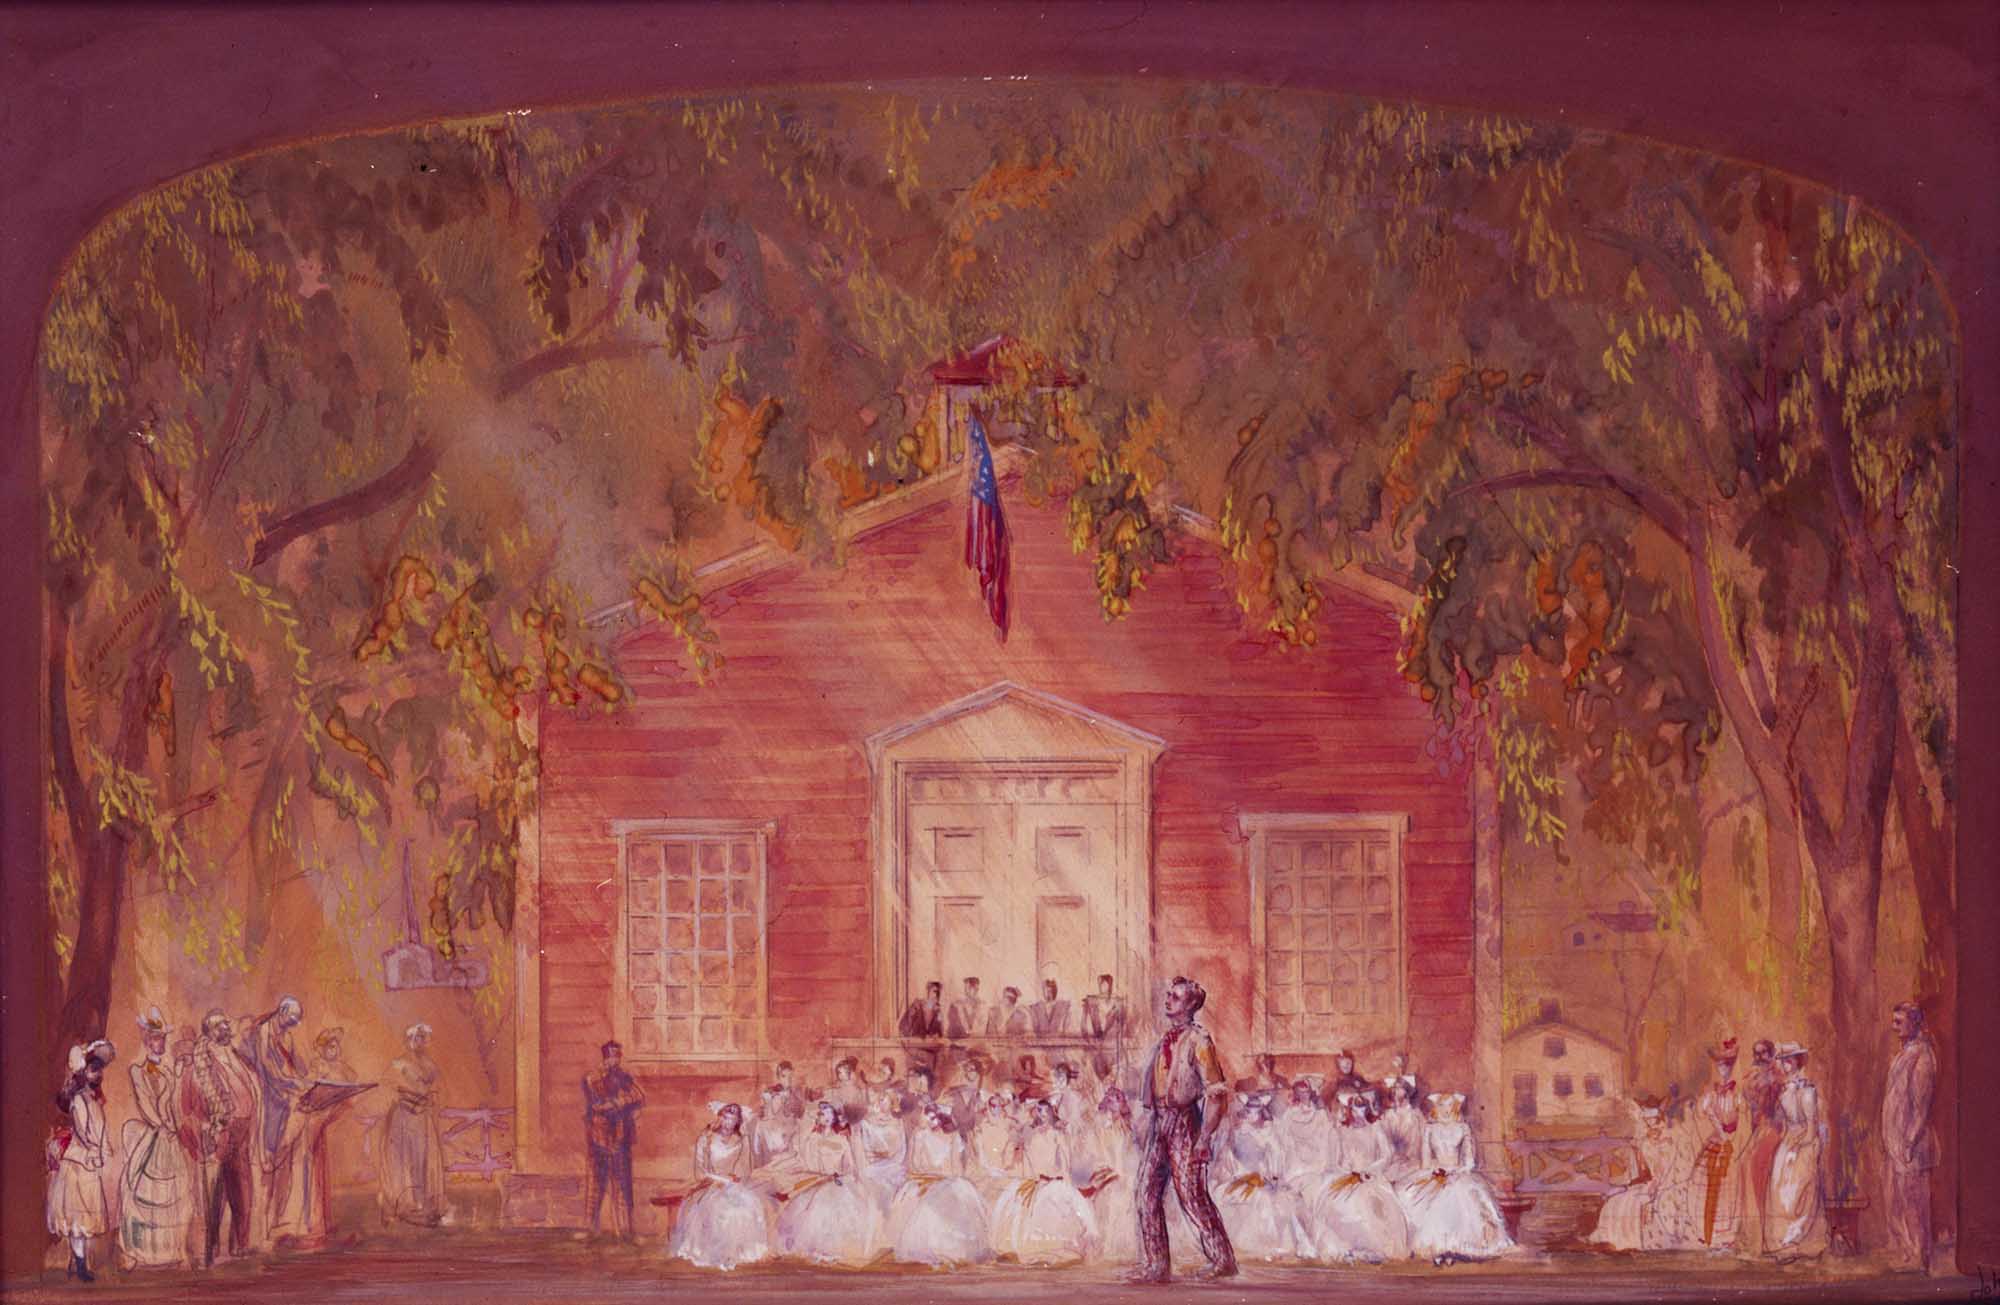 A set design rendering from the 1945 Broadway production of Carousel.